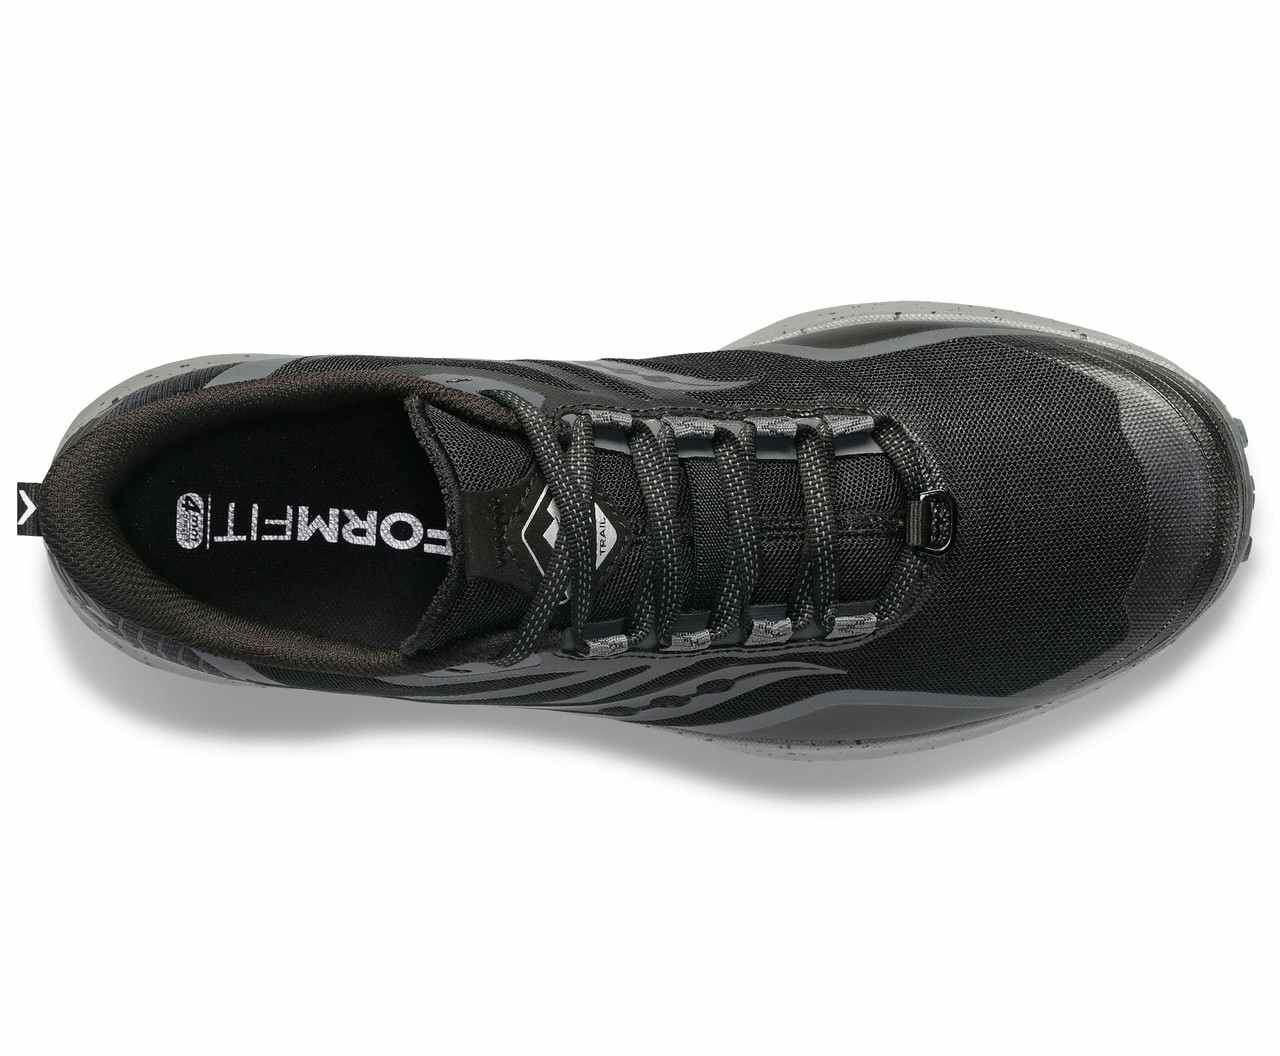 Peregrine 12 Trail Running Shoes Black/Charcoal